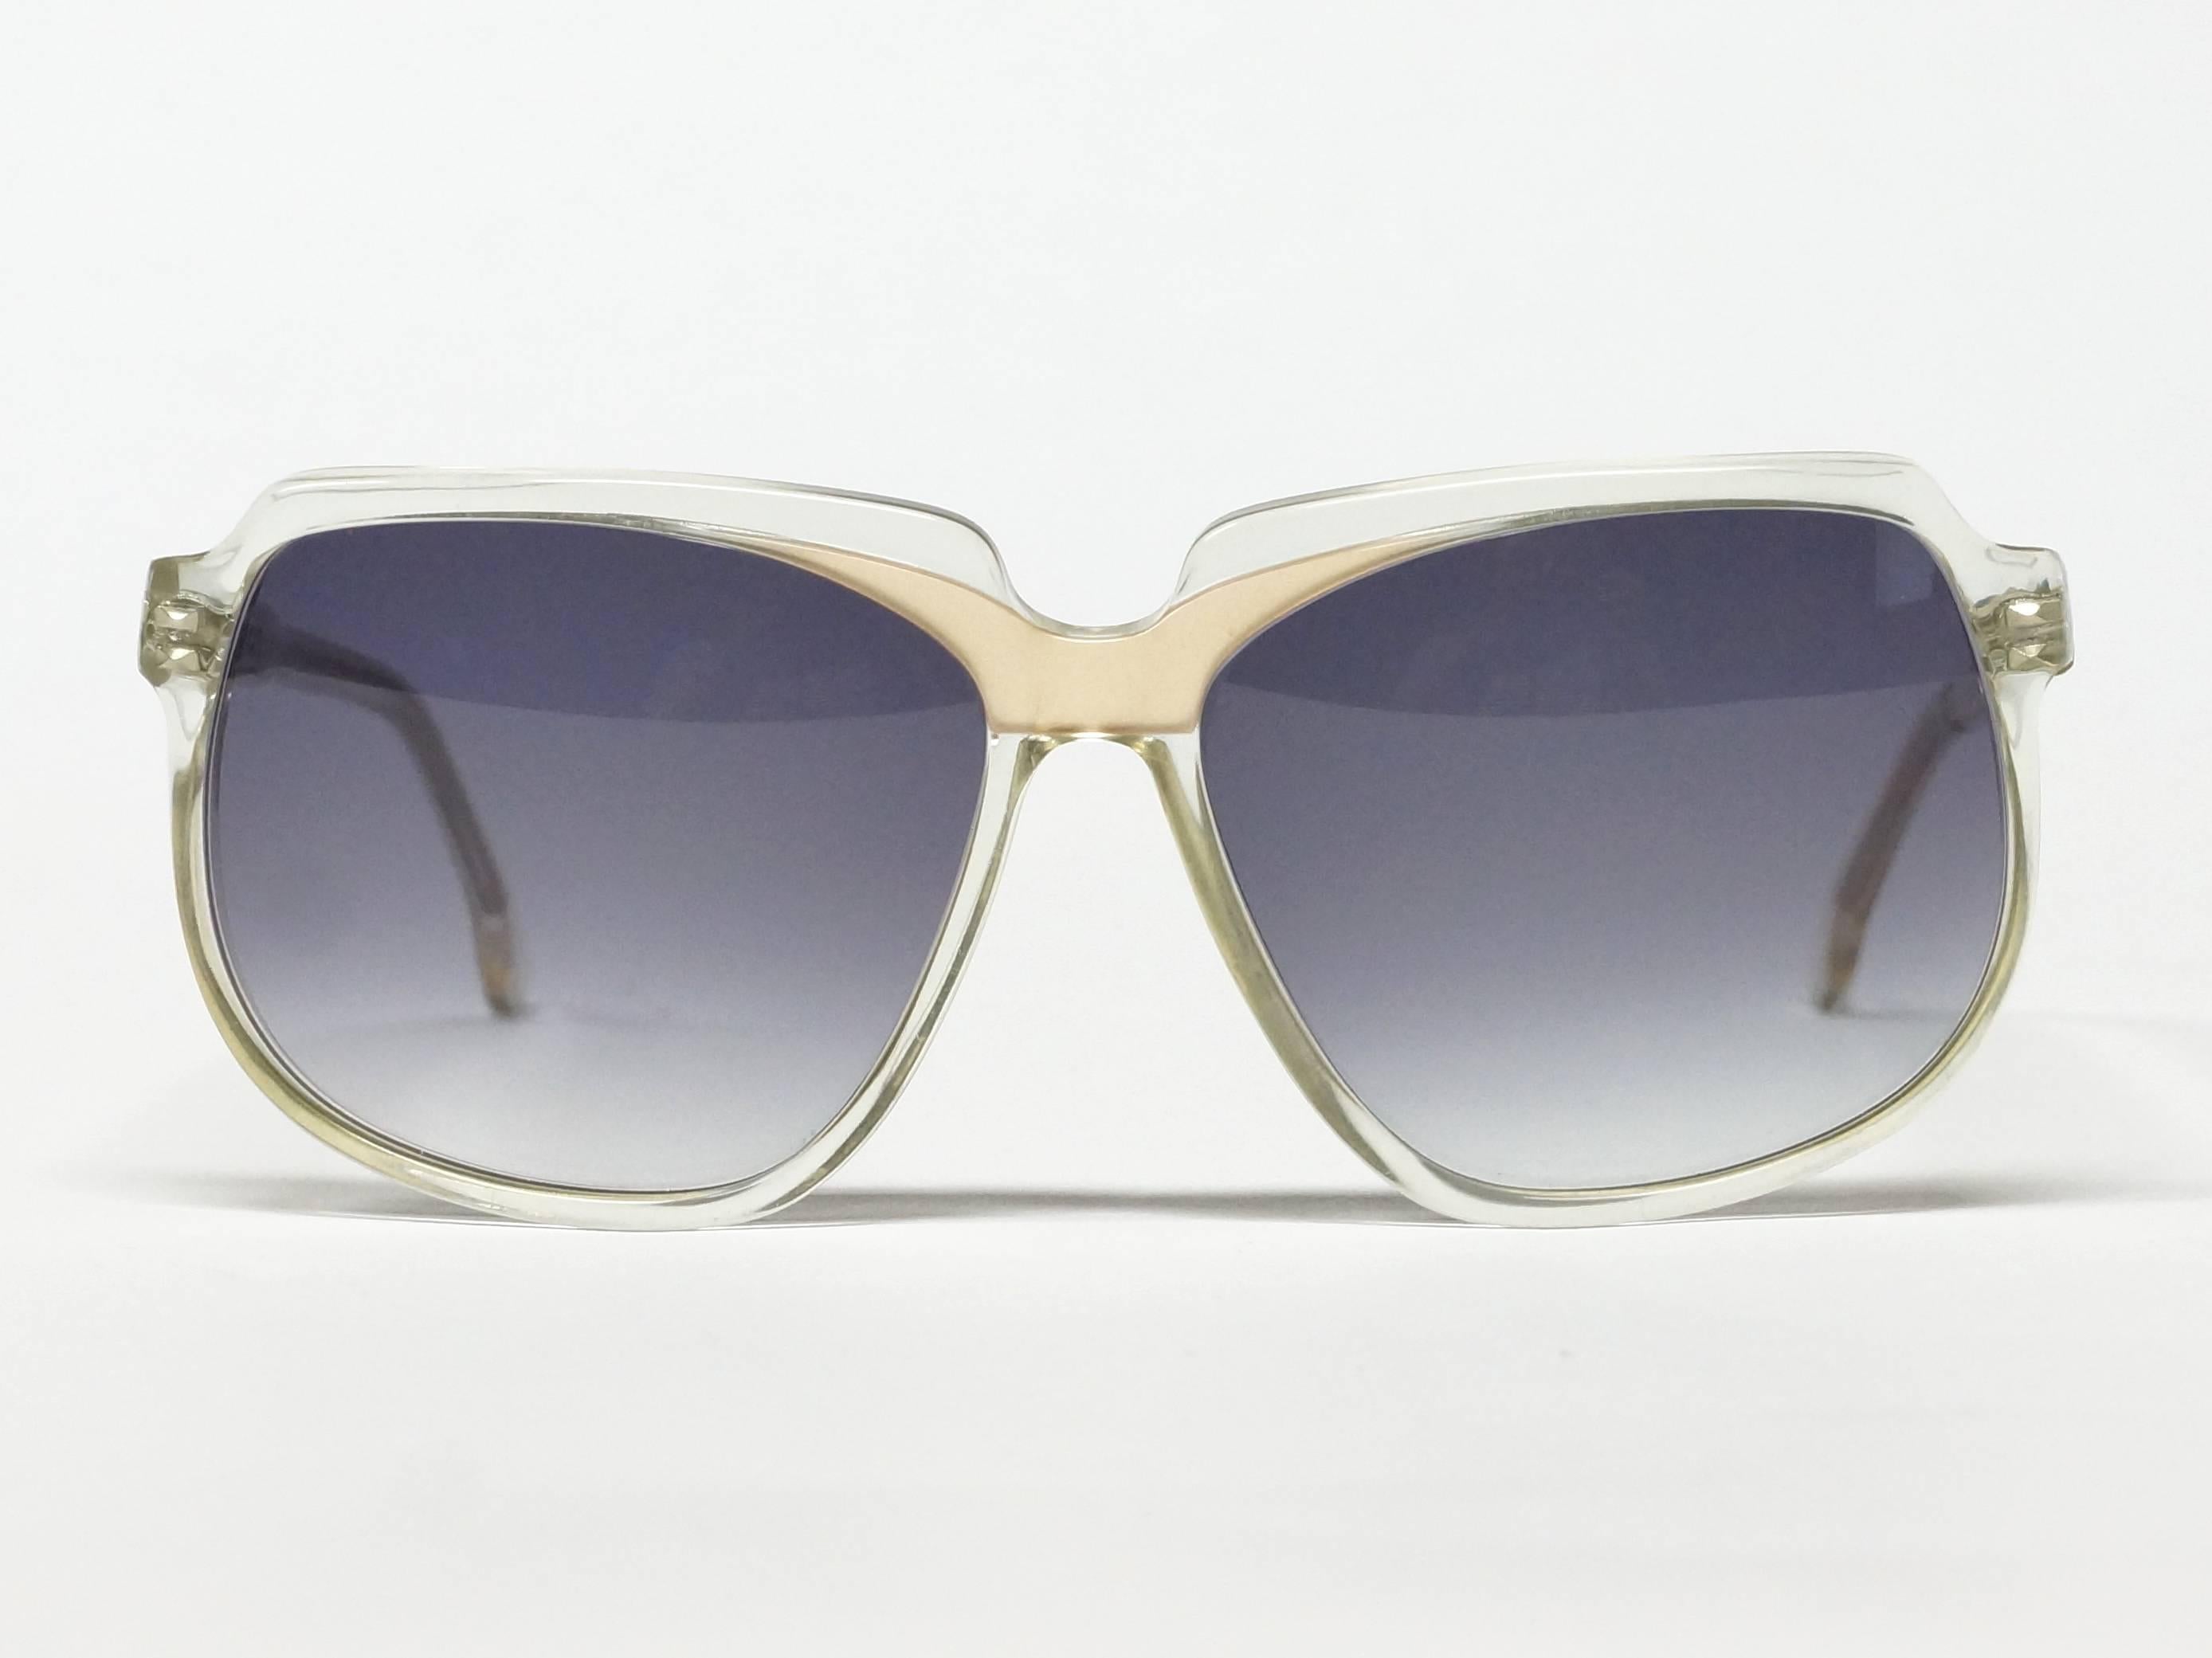 1980s French vintage sunglasses by Charles Jourdan. Clear lucite frame with gold colored highlights. 

model: CJ13
size: 53▢17-140

approximate dimensions:
temple length: 140mm - 5 1/2